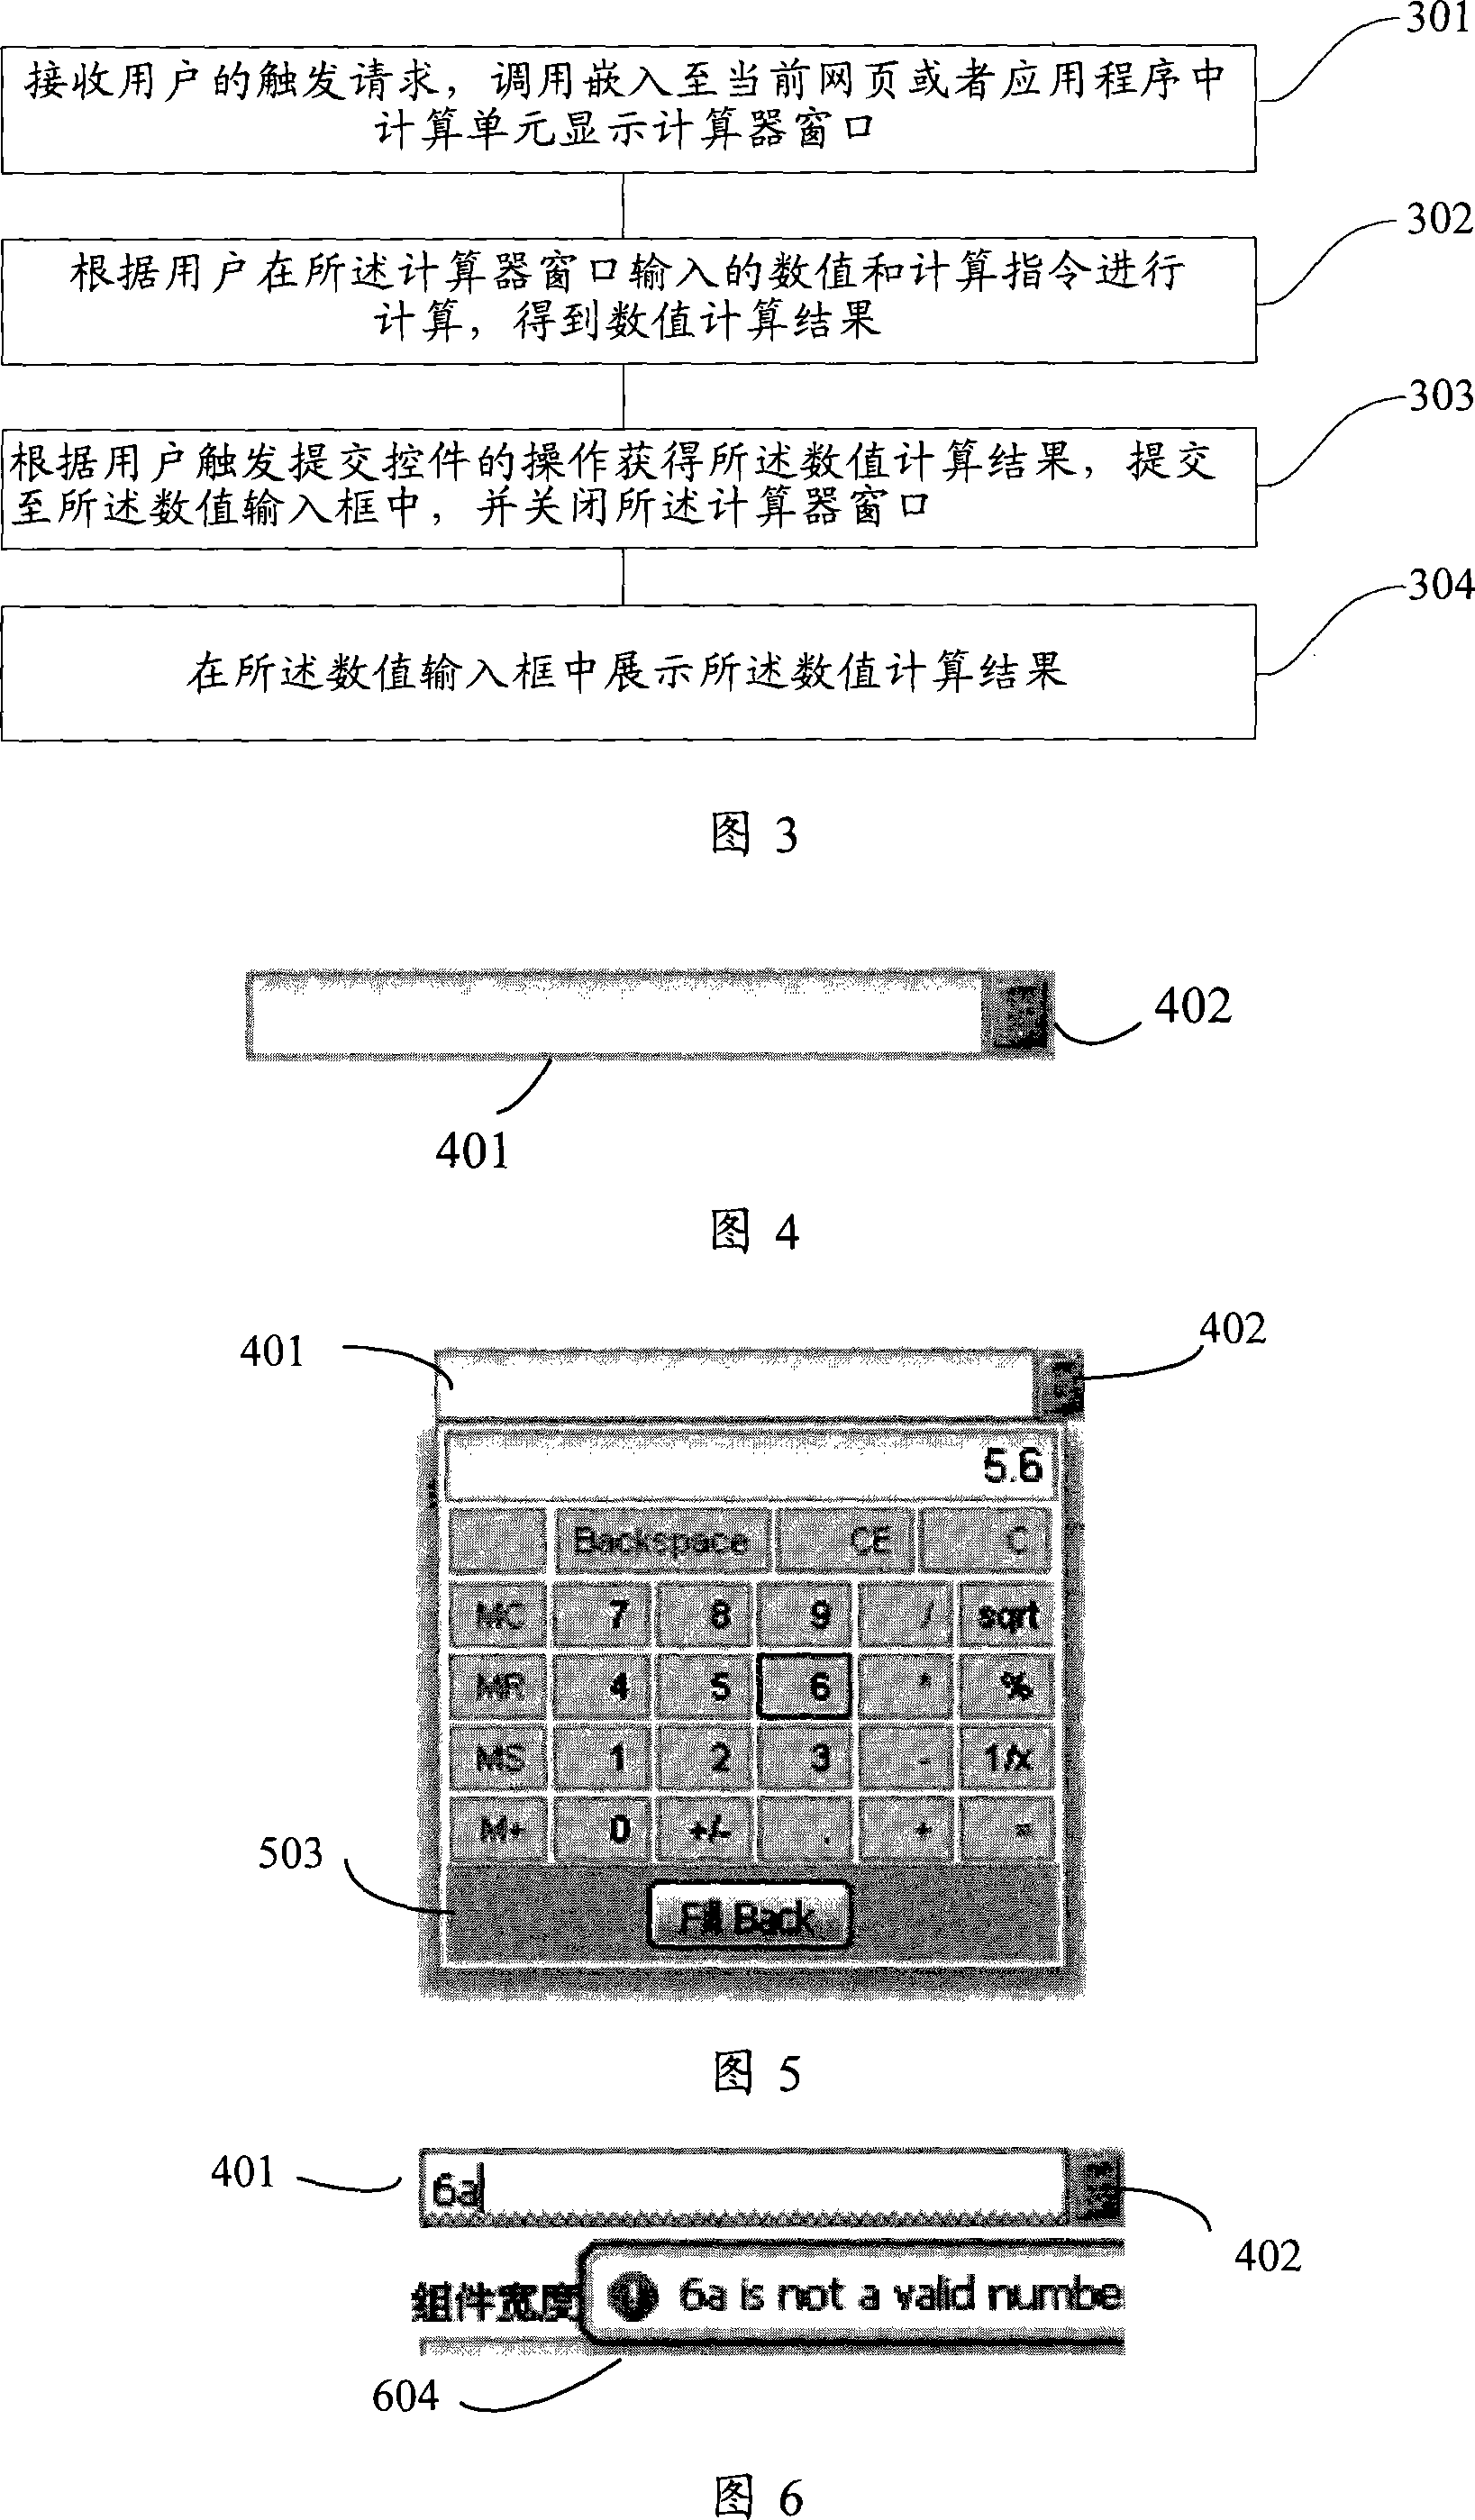 Numerical value input device and method for numerical value input using the device